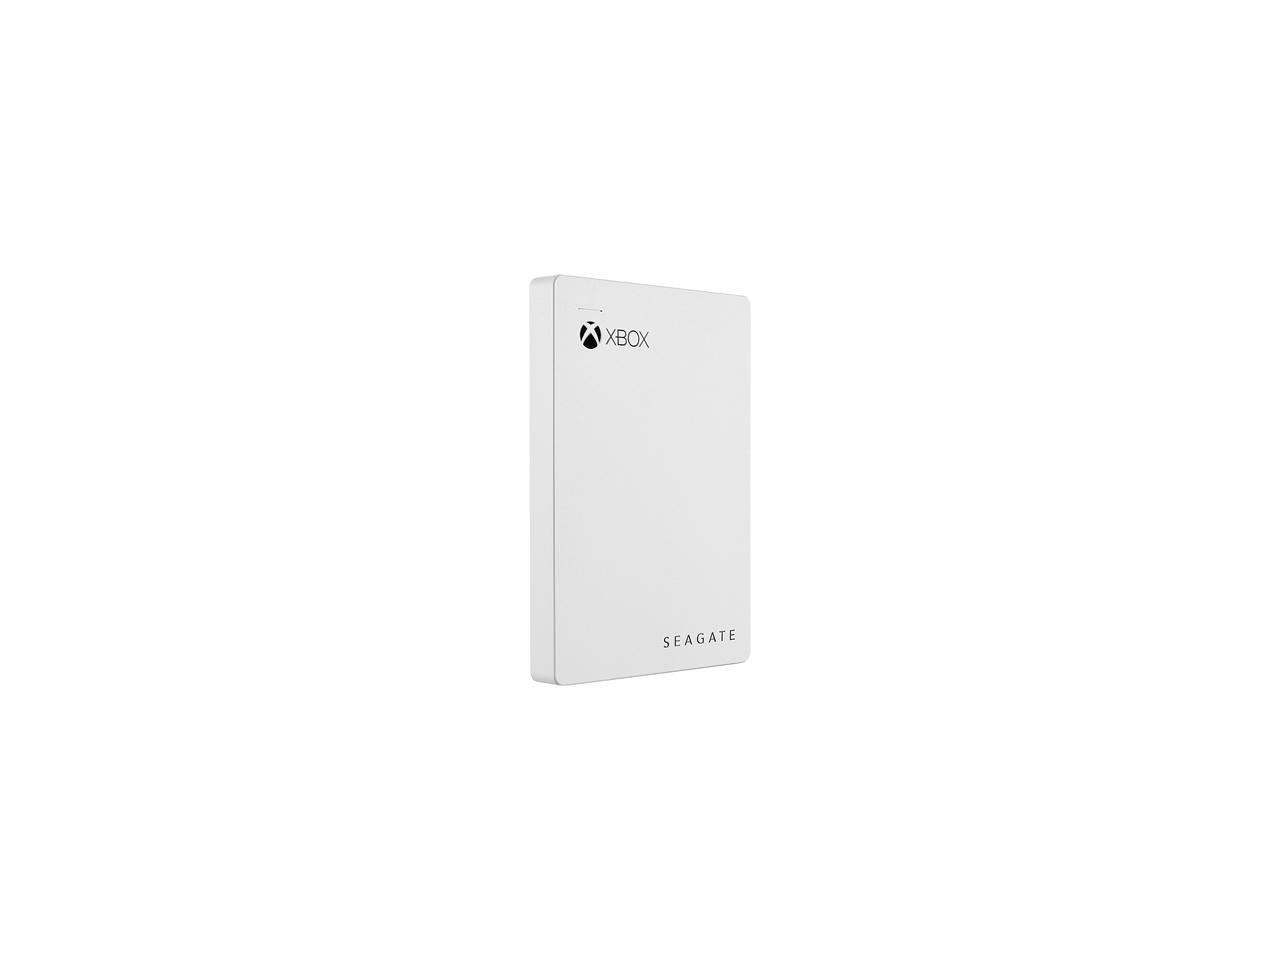 Seagate 2TB Game Drive for Xbox Portable Hard Drive - Game Pass Special Edition USB 3.0 Model STEA2000417 White